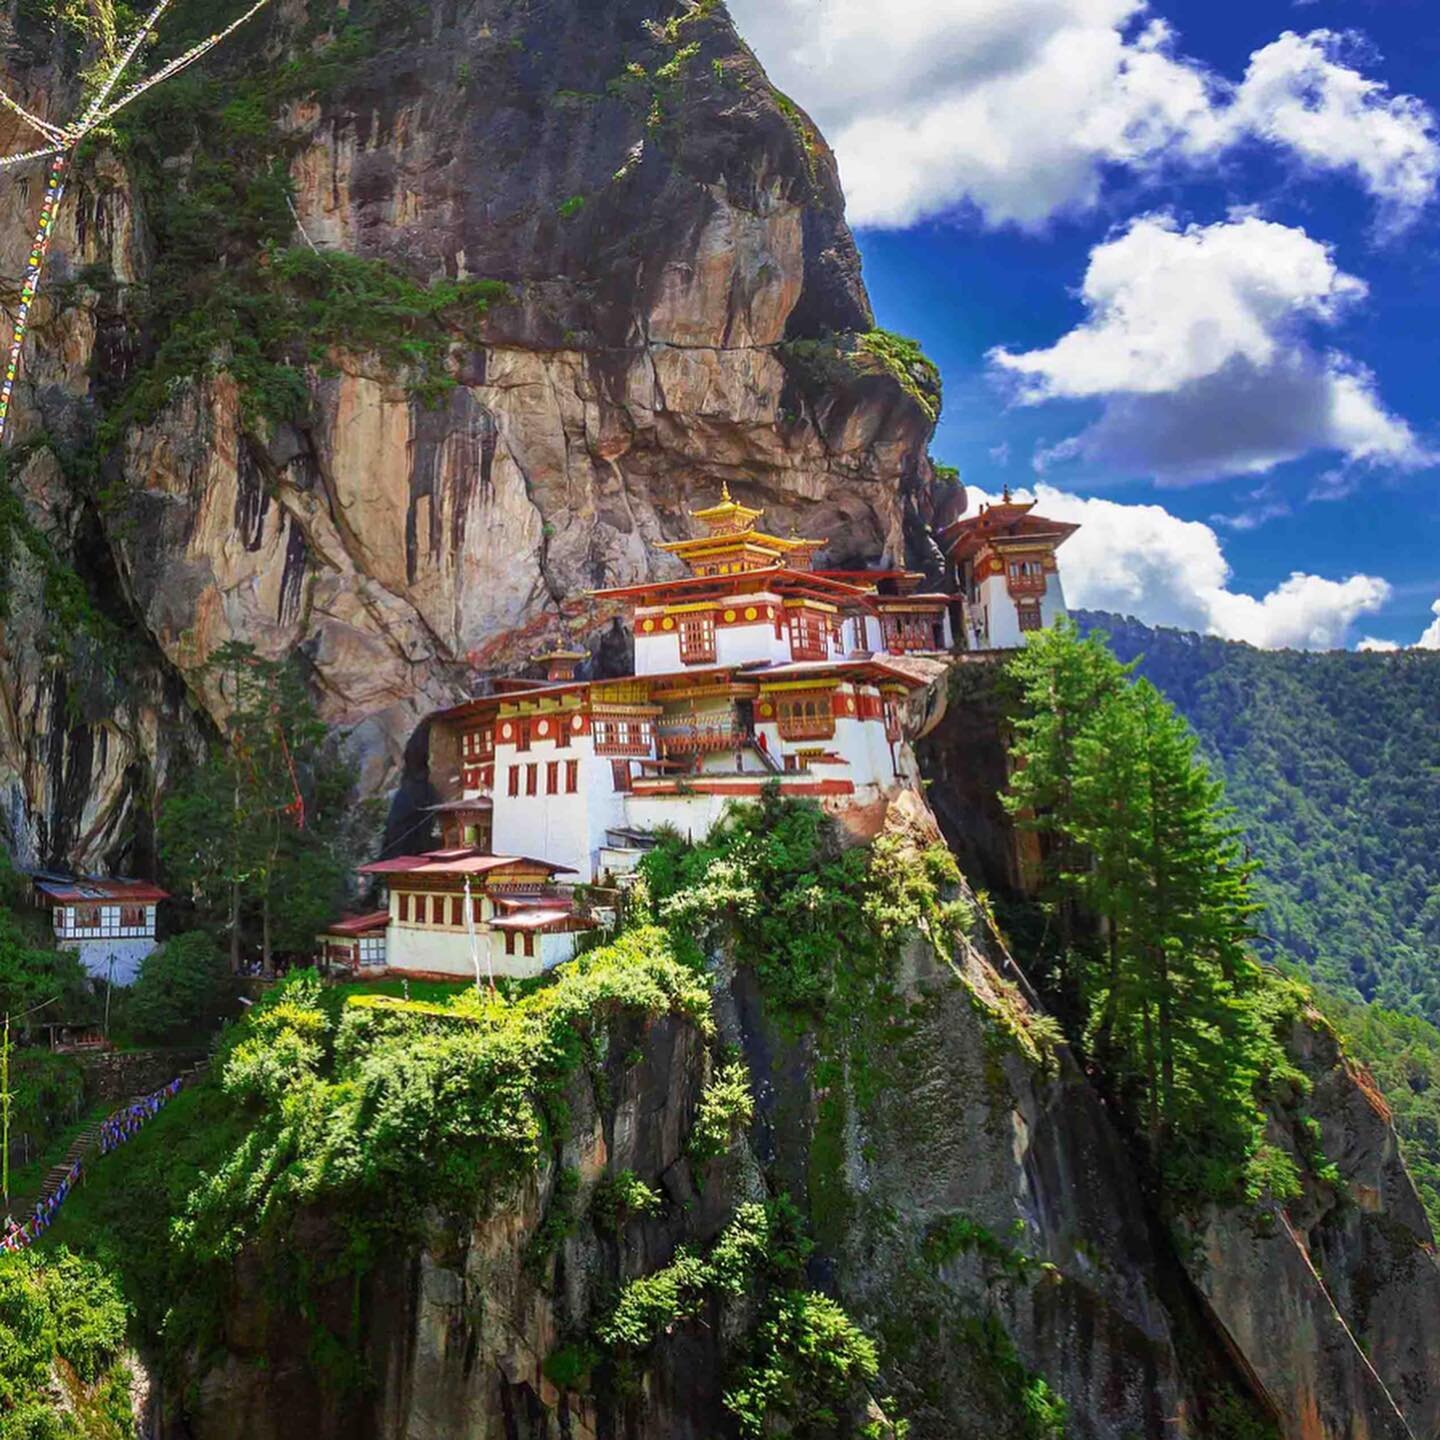 | YOGA RETREAT | BHUTAN 🇧🇹 2020
.
There&rsquo;s a whiff of adventure in the air...Come with me!
.
Let&rsquo;s do yoga in a remote mountain kingdom of fantasy and wonder. Let&rsquo;s journey to a land of surreal temples and ancient rituals.✨🏔
.
I&r